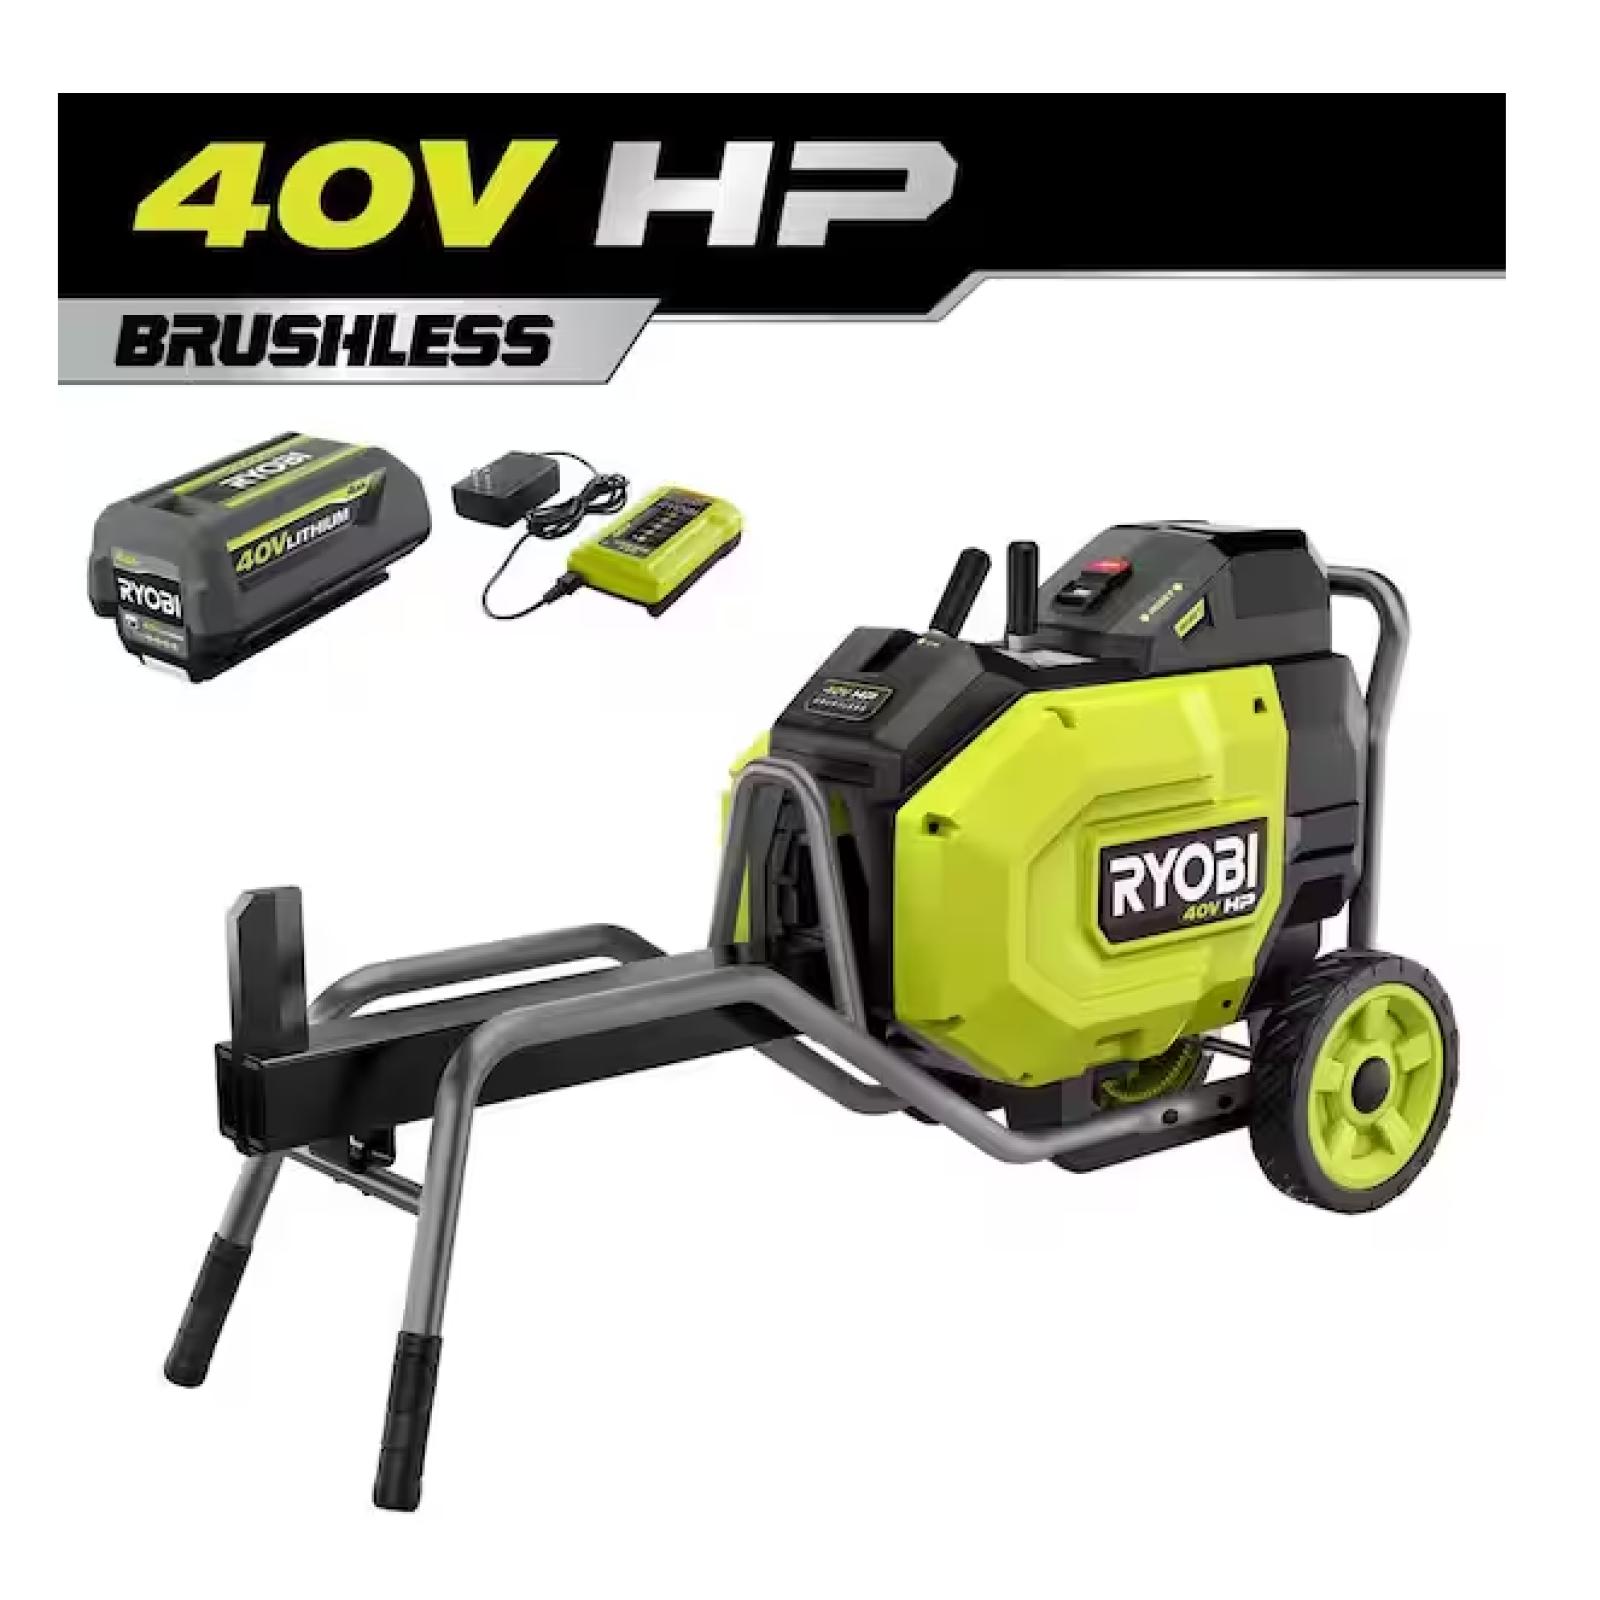 DALLAS LOCATION- NEW! RYOBI 40V HP Brushless 12-Ton Kinetic Battery Electric Log Splitter Kit - 4.0Ah Battery and Charger Included